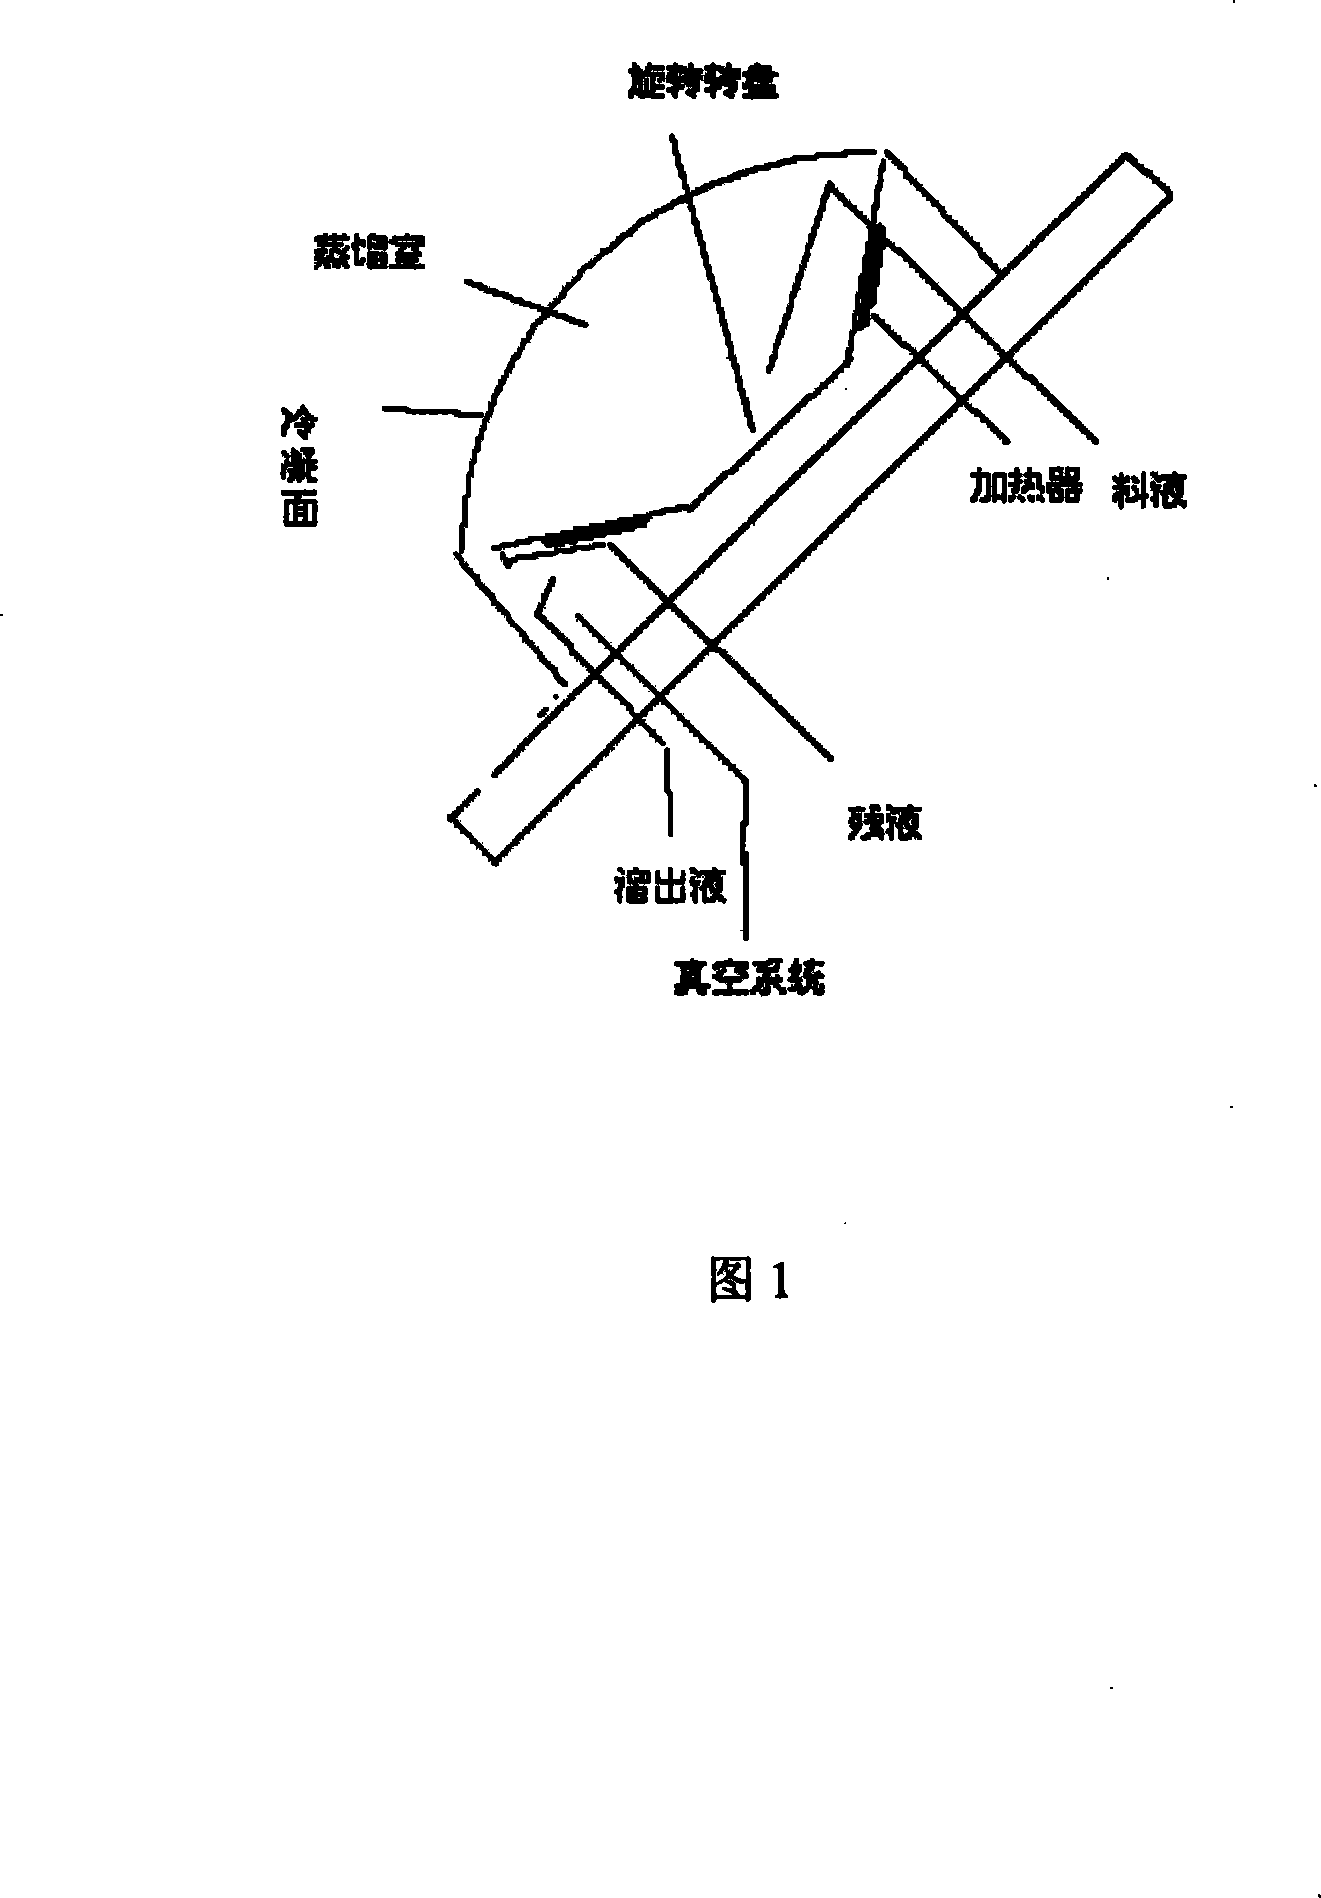 Method for preparing high-pure lactic acid by using centrifugal molecular distillation technique